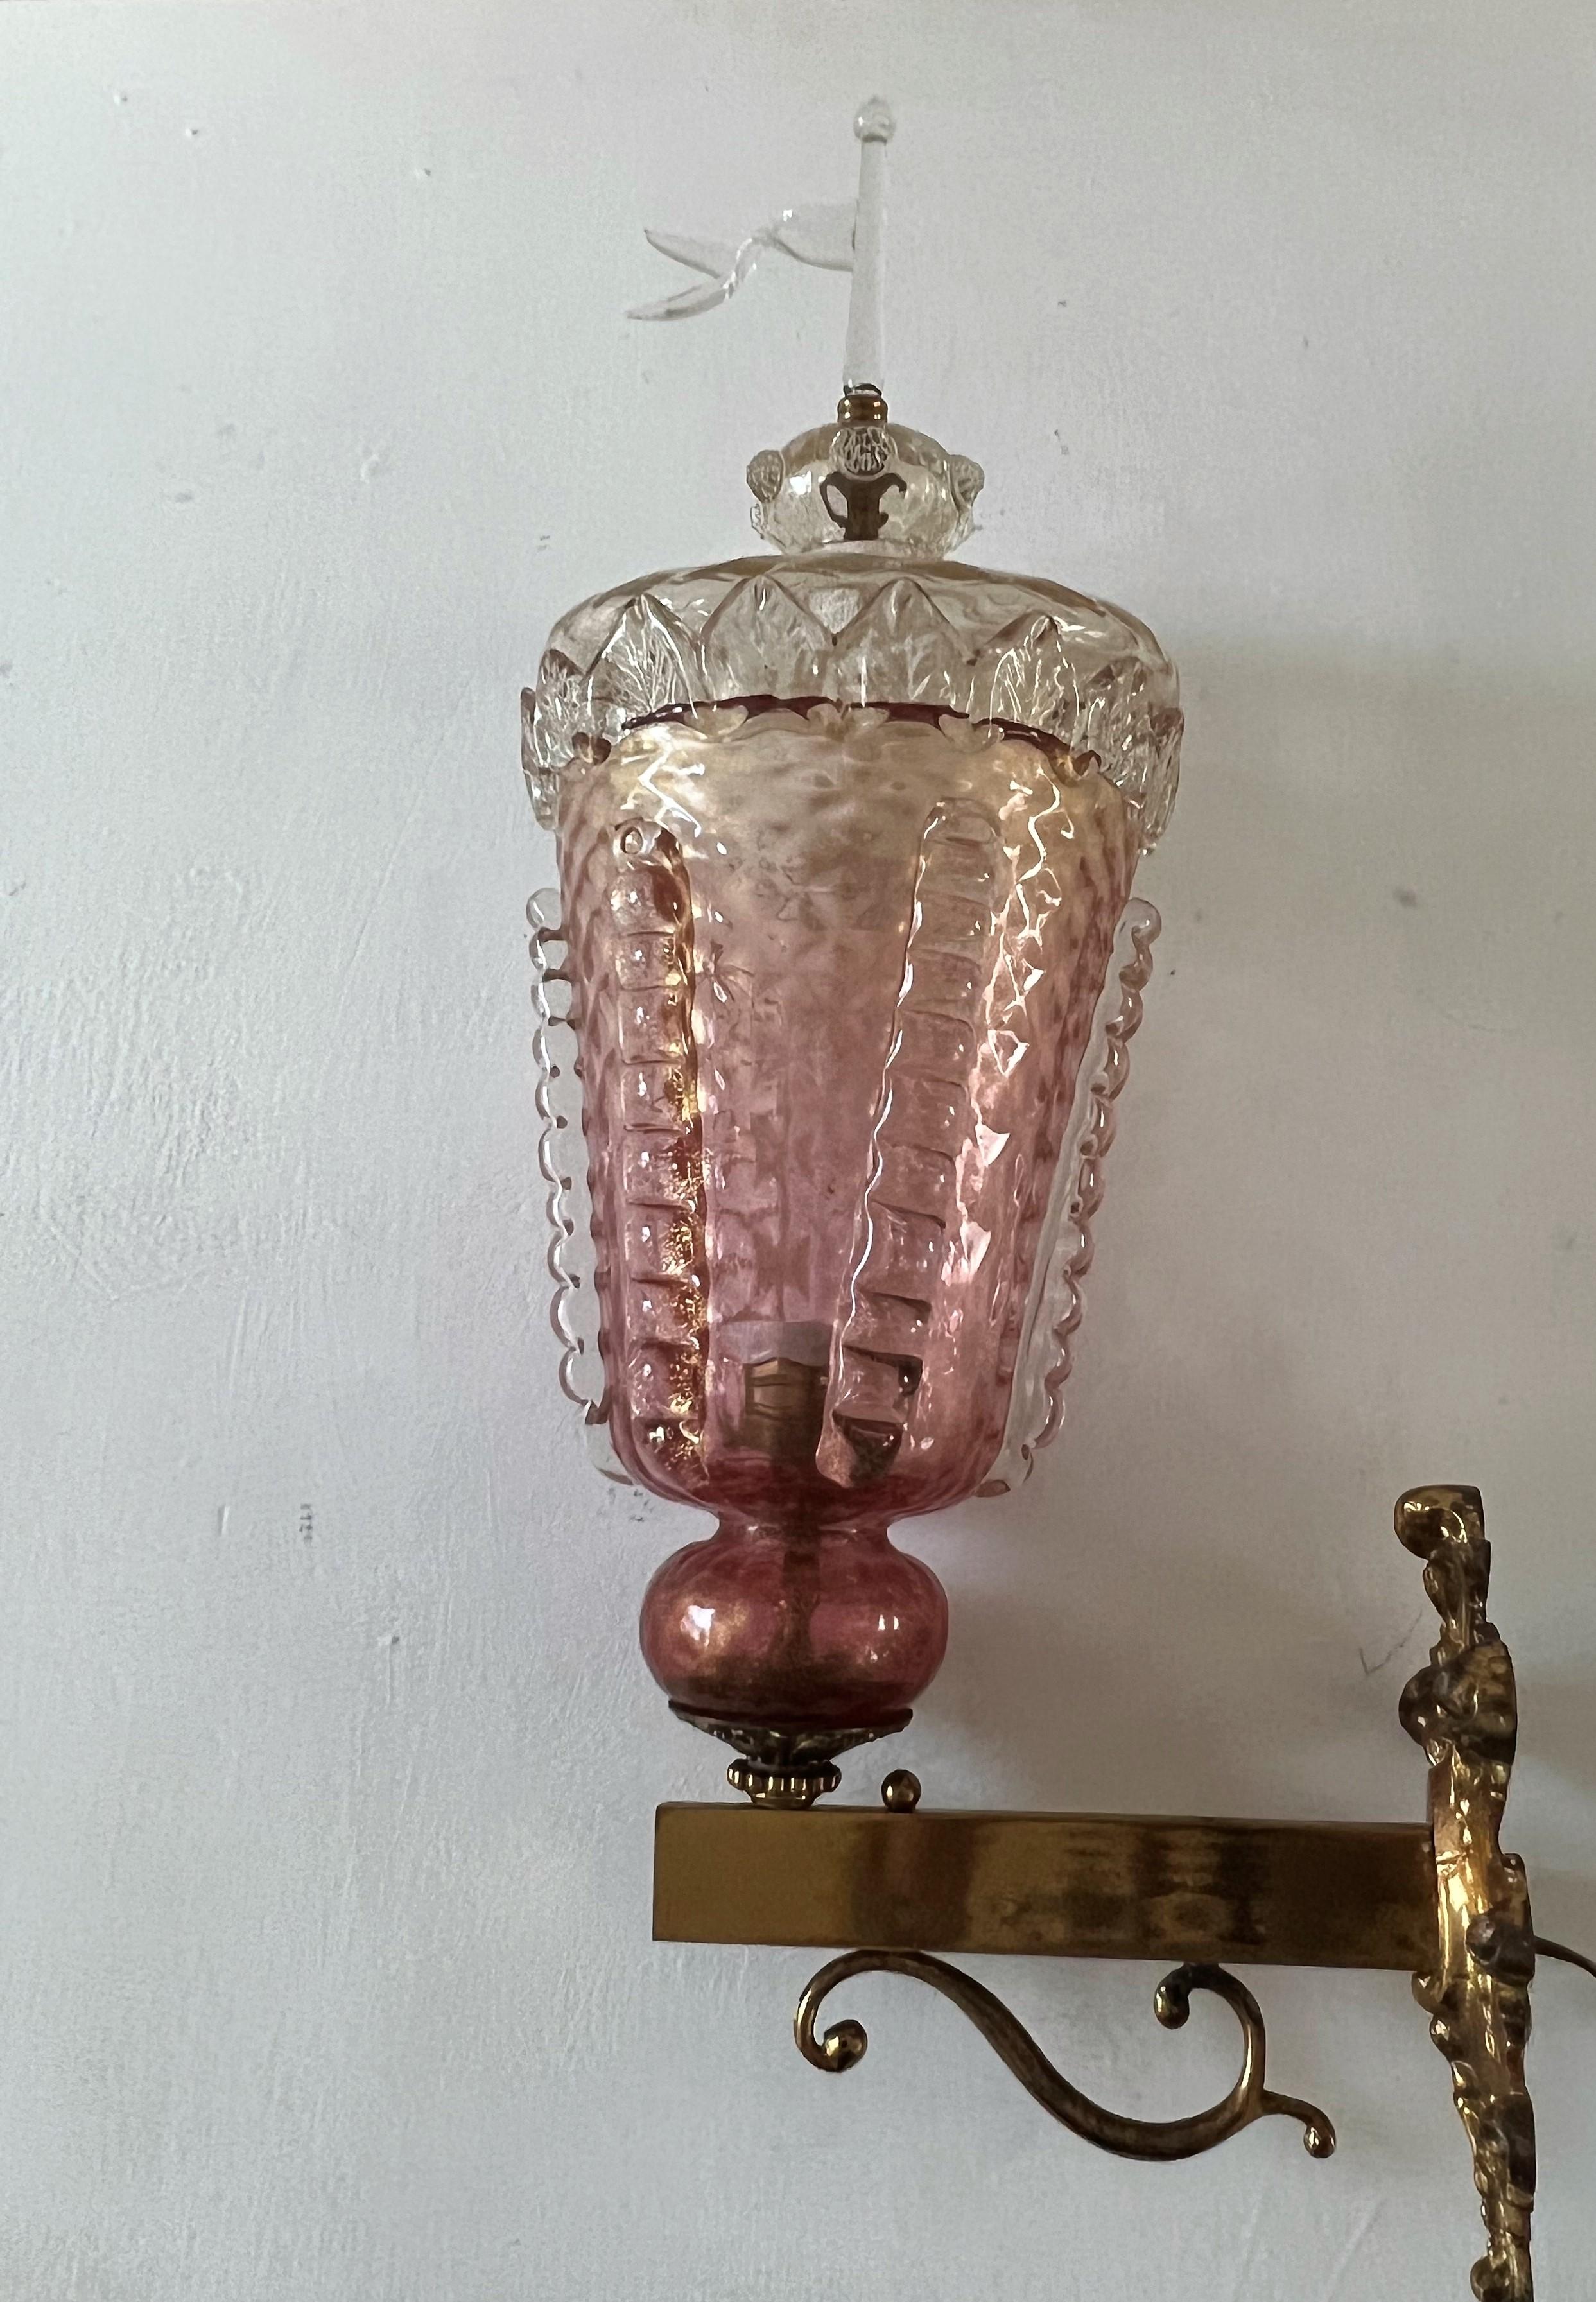 Large sconce manufactured in Murano glass in the shape of a Venetian Medieval Lantern. 
Attributed to the Barovier & Toso factory and most likely manufactured between 1920-1940.
The glass has pink and clear tones as well as gold flecks throughout.